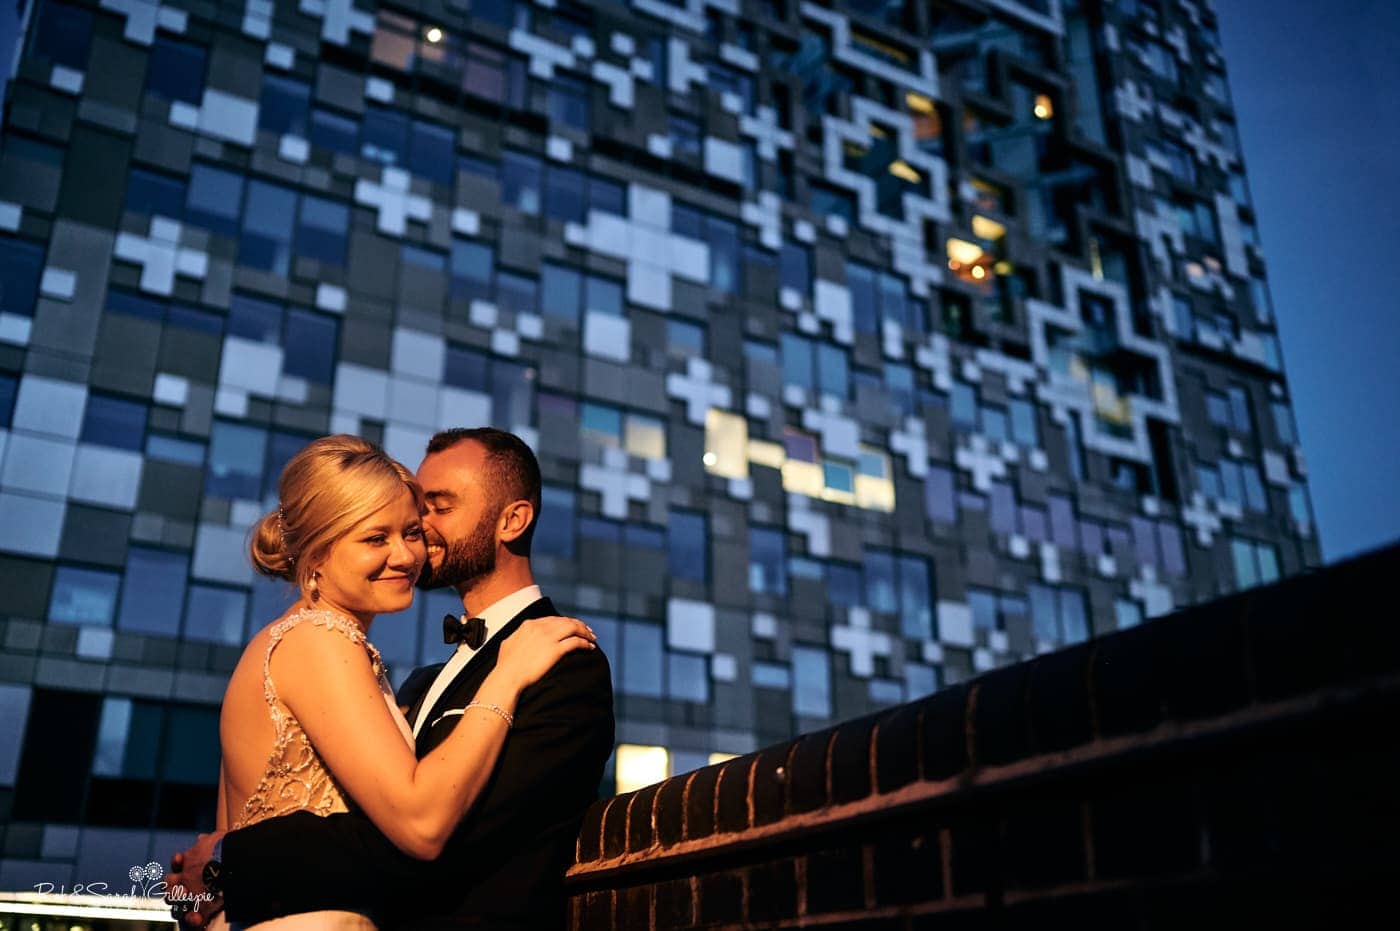 Bride & Groom happy and relaxed outside The Cube building in Birmingham, at night